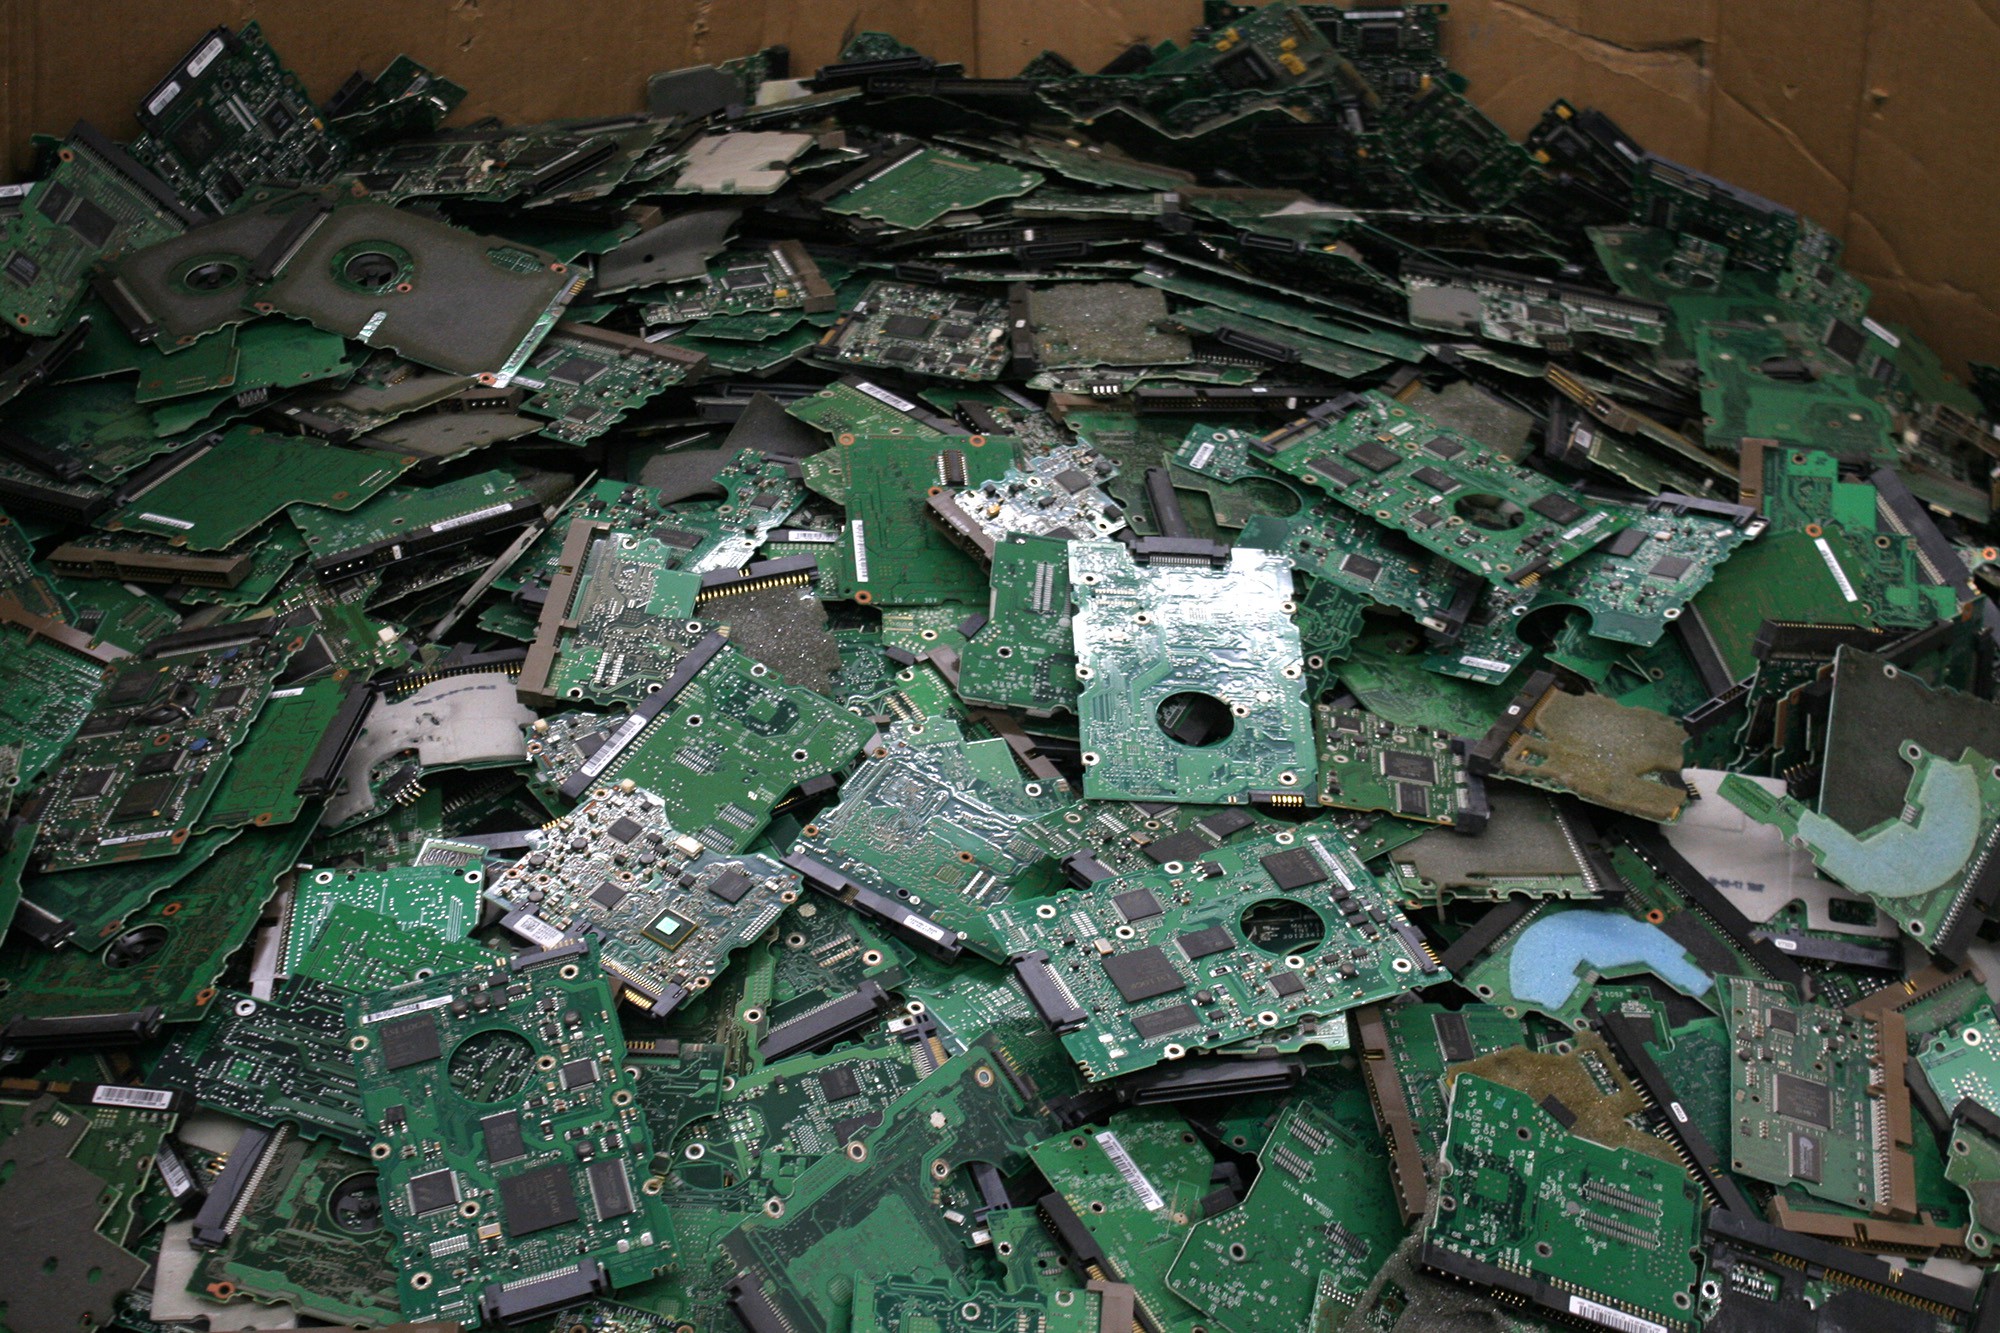 No state law on e-waste, but agency encouraging recycling, proper 